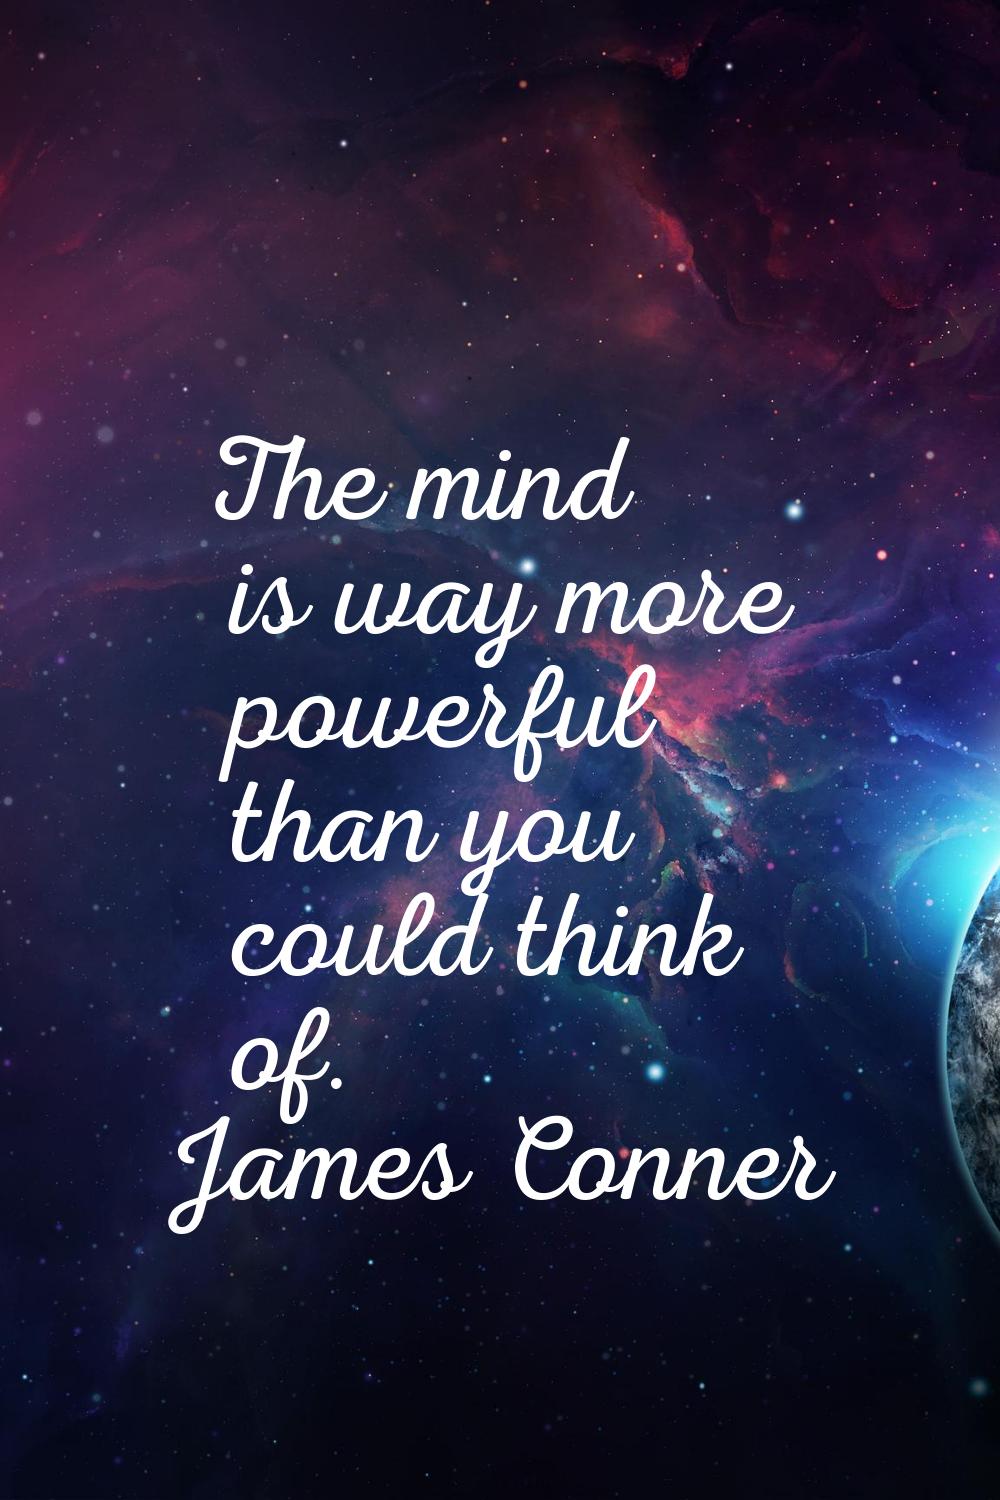 The mind is way more powerful than you could think of.